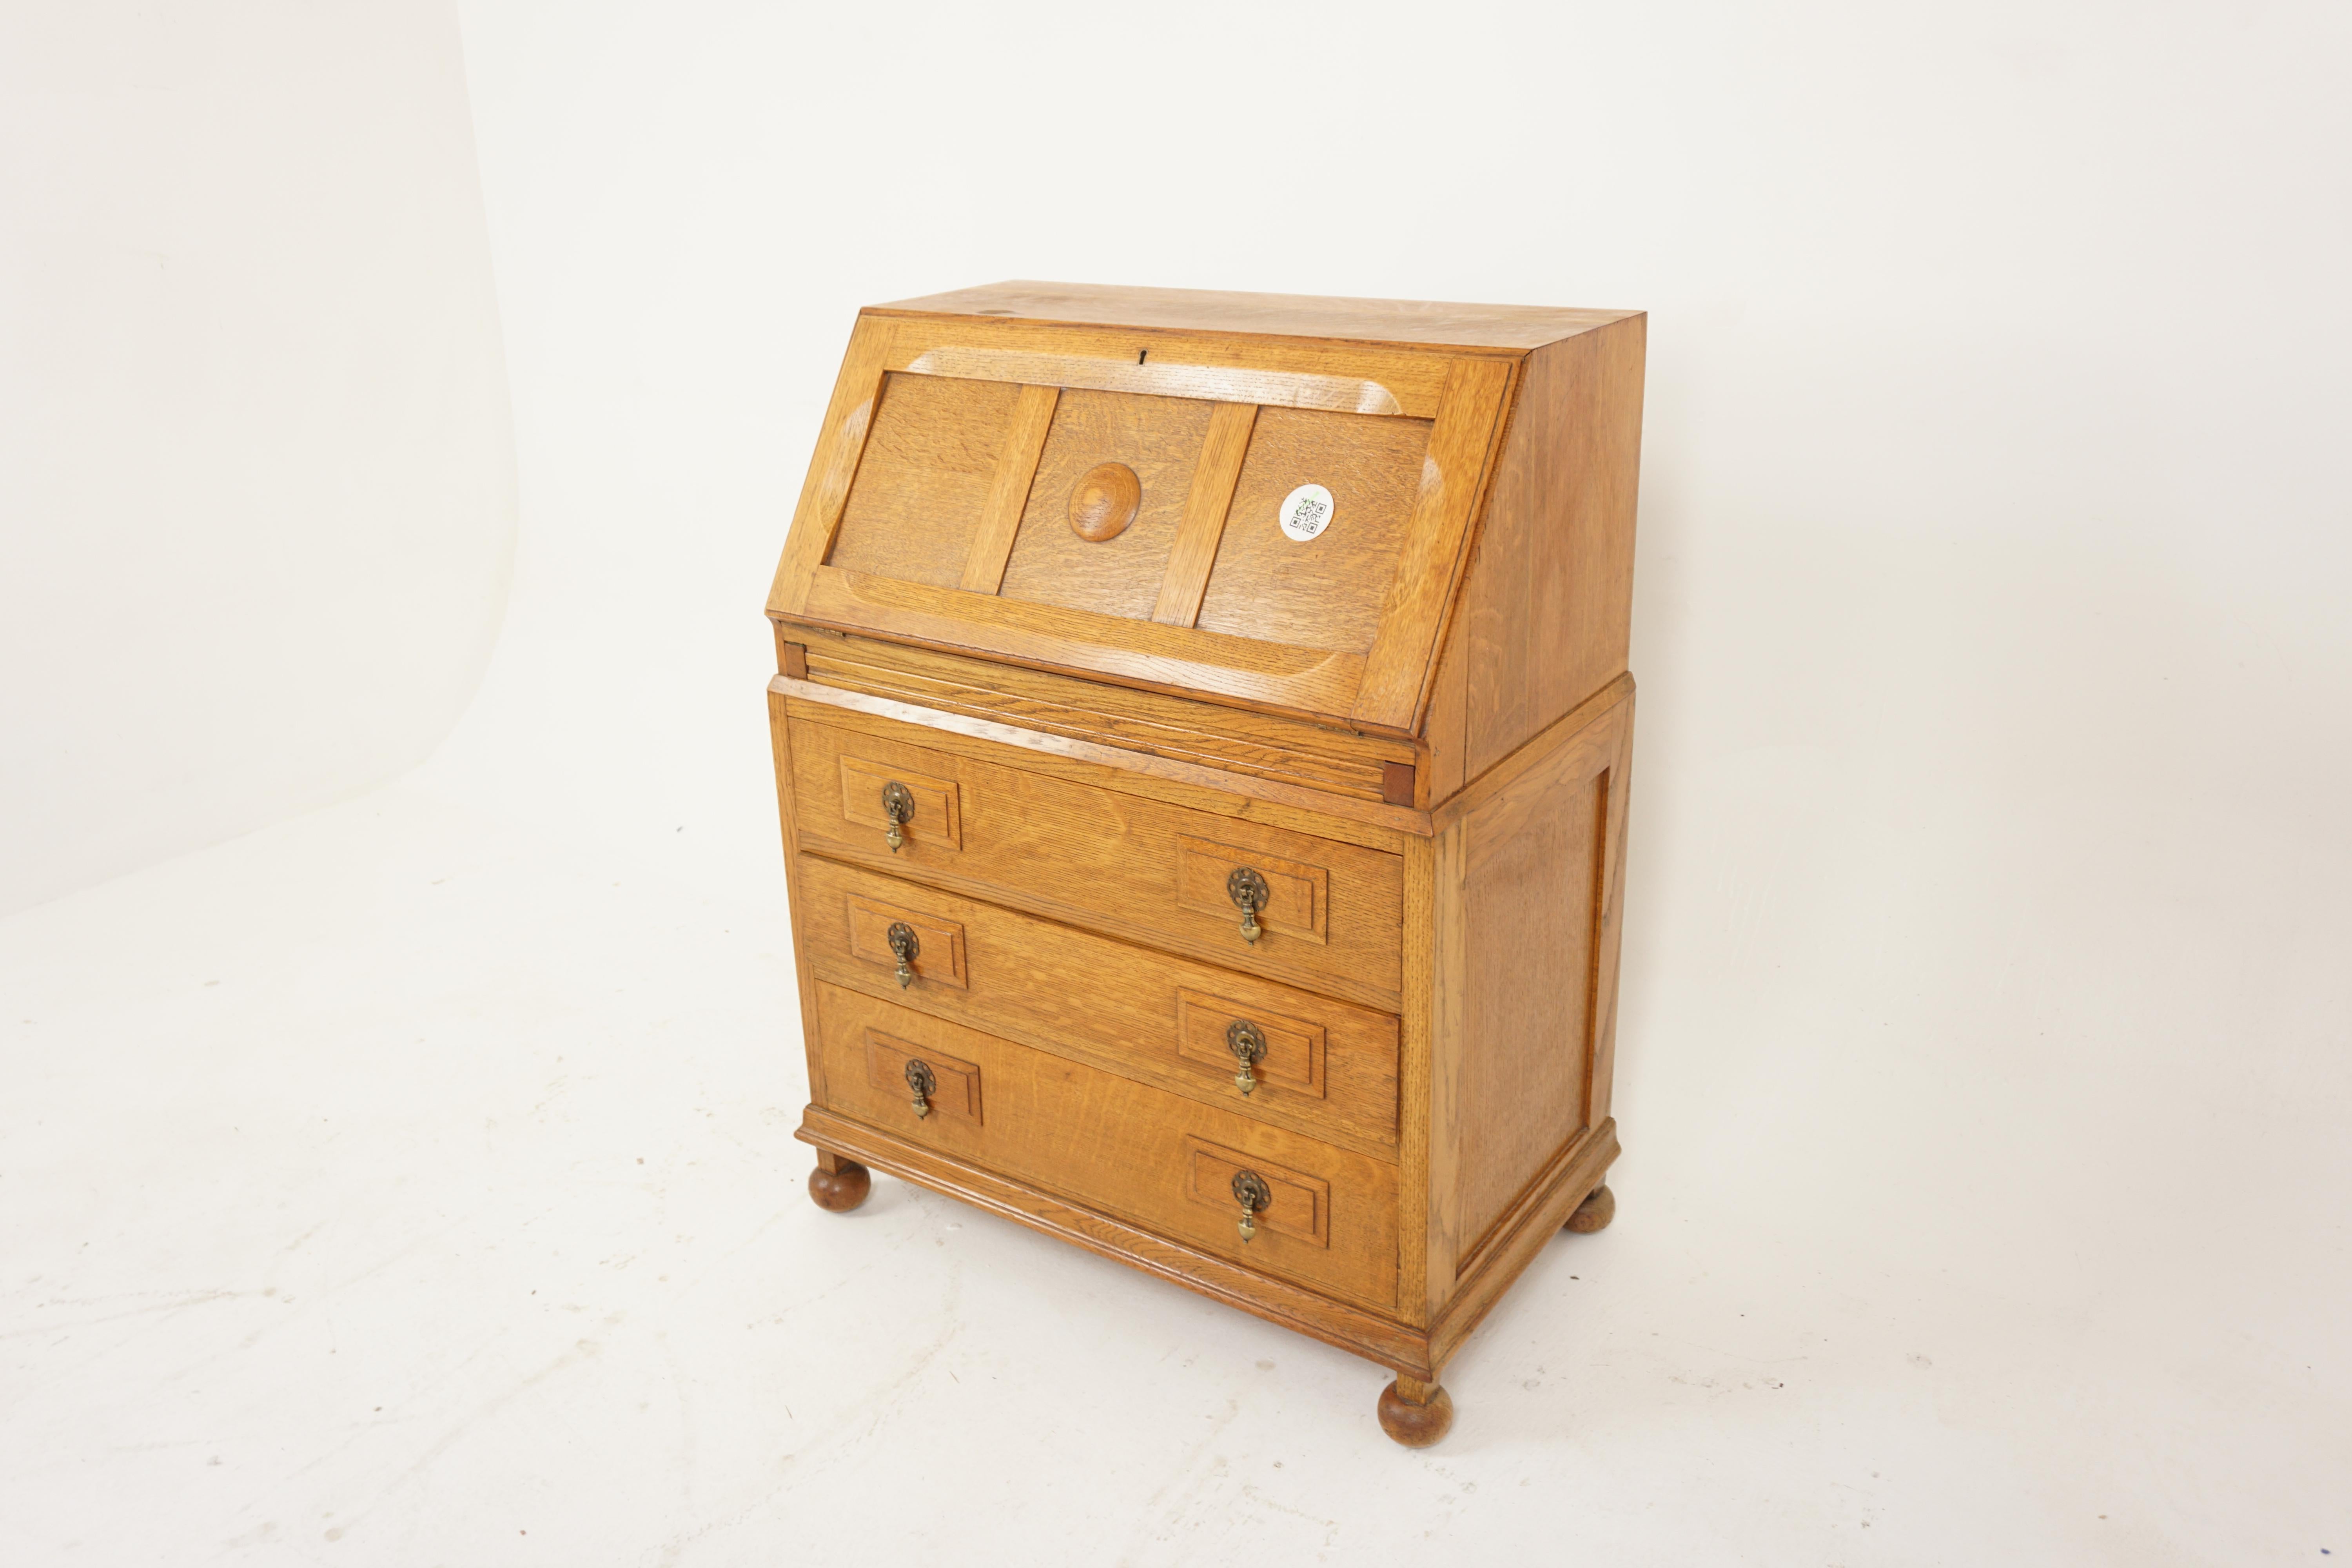 Vintage Oak writing desk, slant front desk, Scotland 1920, H805

Scotland 1920
Solid Oak
Original finish
Rectangular moulded top
Three panelled division on the slanted front
Opens to reveal fitted interior with small drawer in the center with